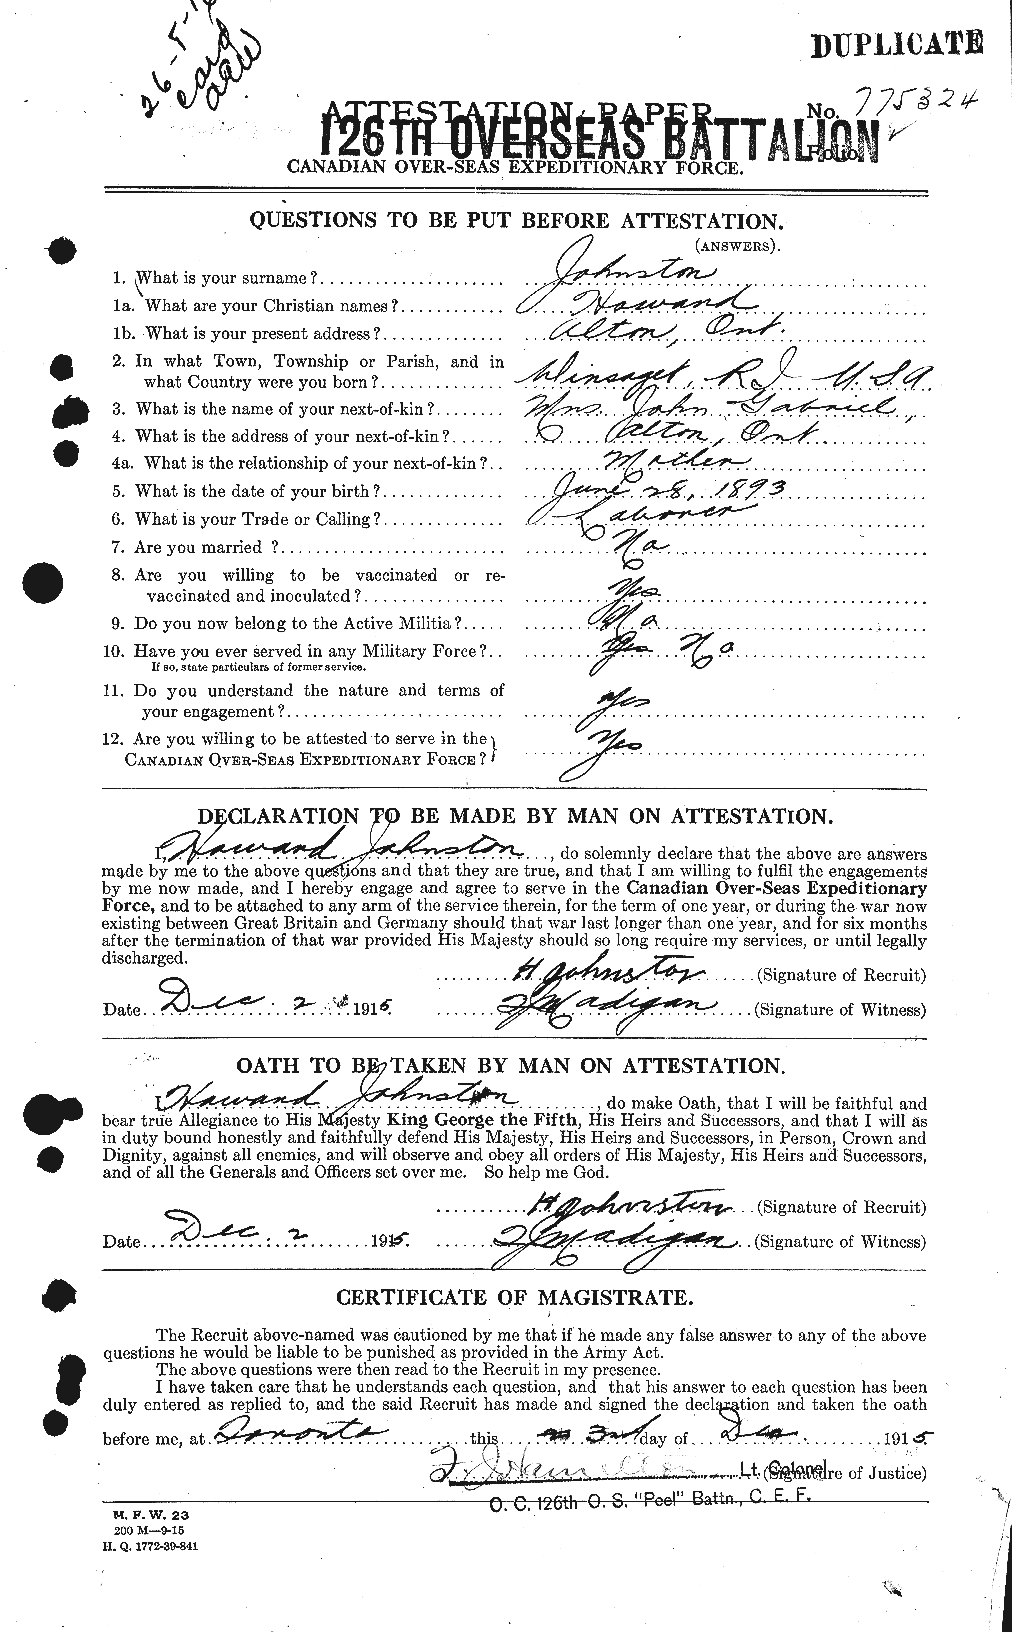 Personnel Records of the First World War - CEF 422650a